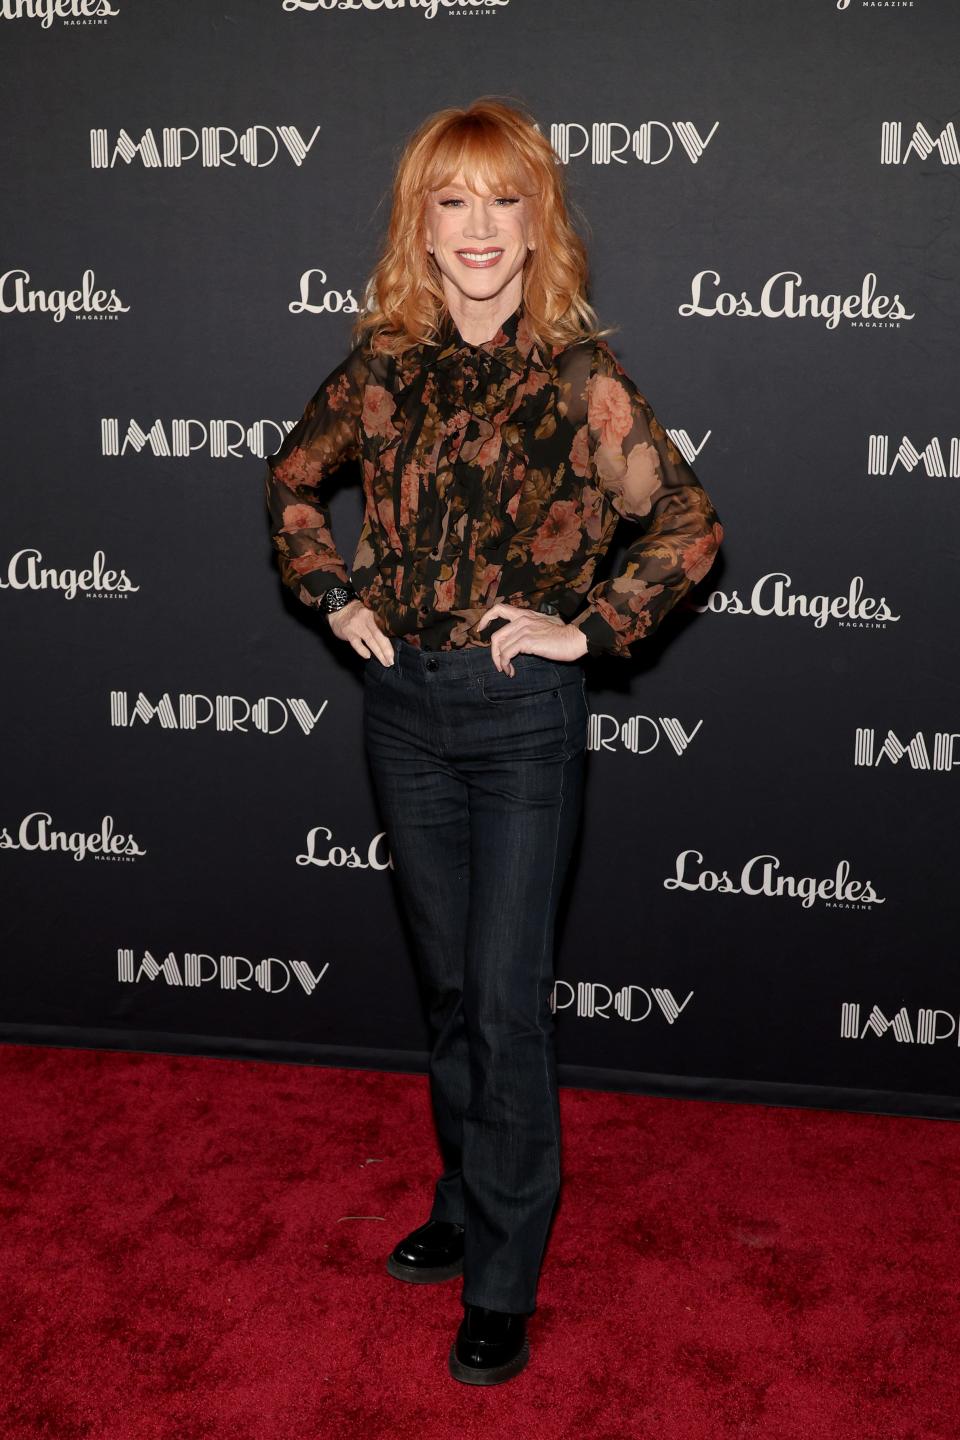 Kathy Griffin attends the 60th Anniversary at The Improv at Hollywood Improv in Los Angeles.